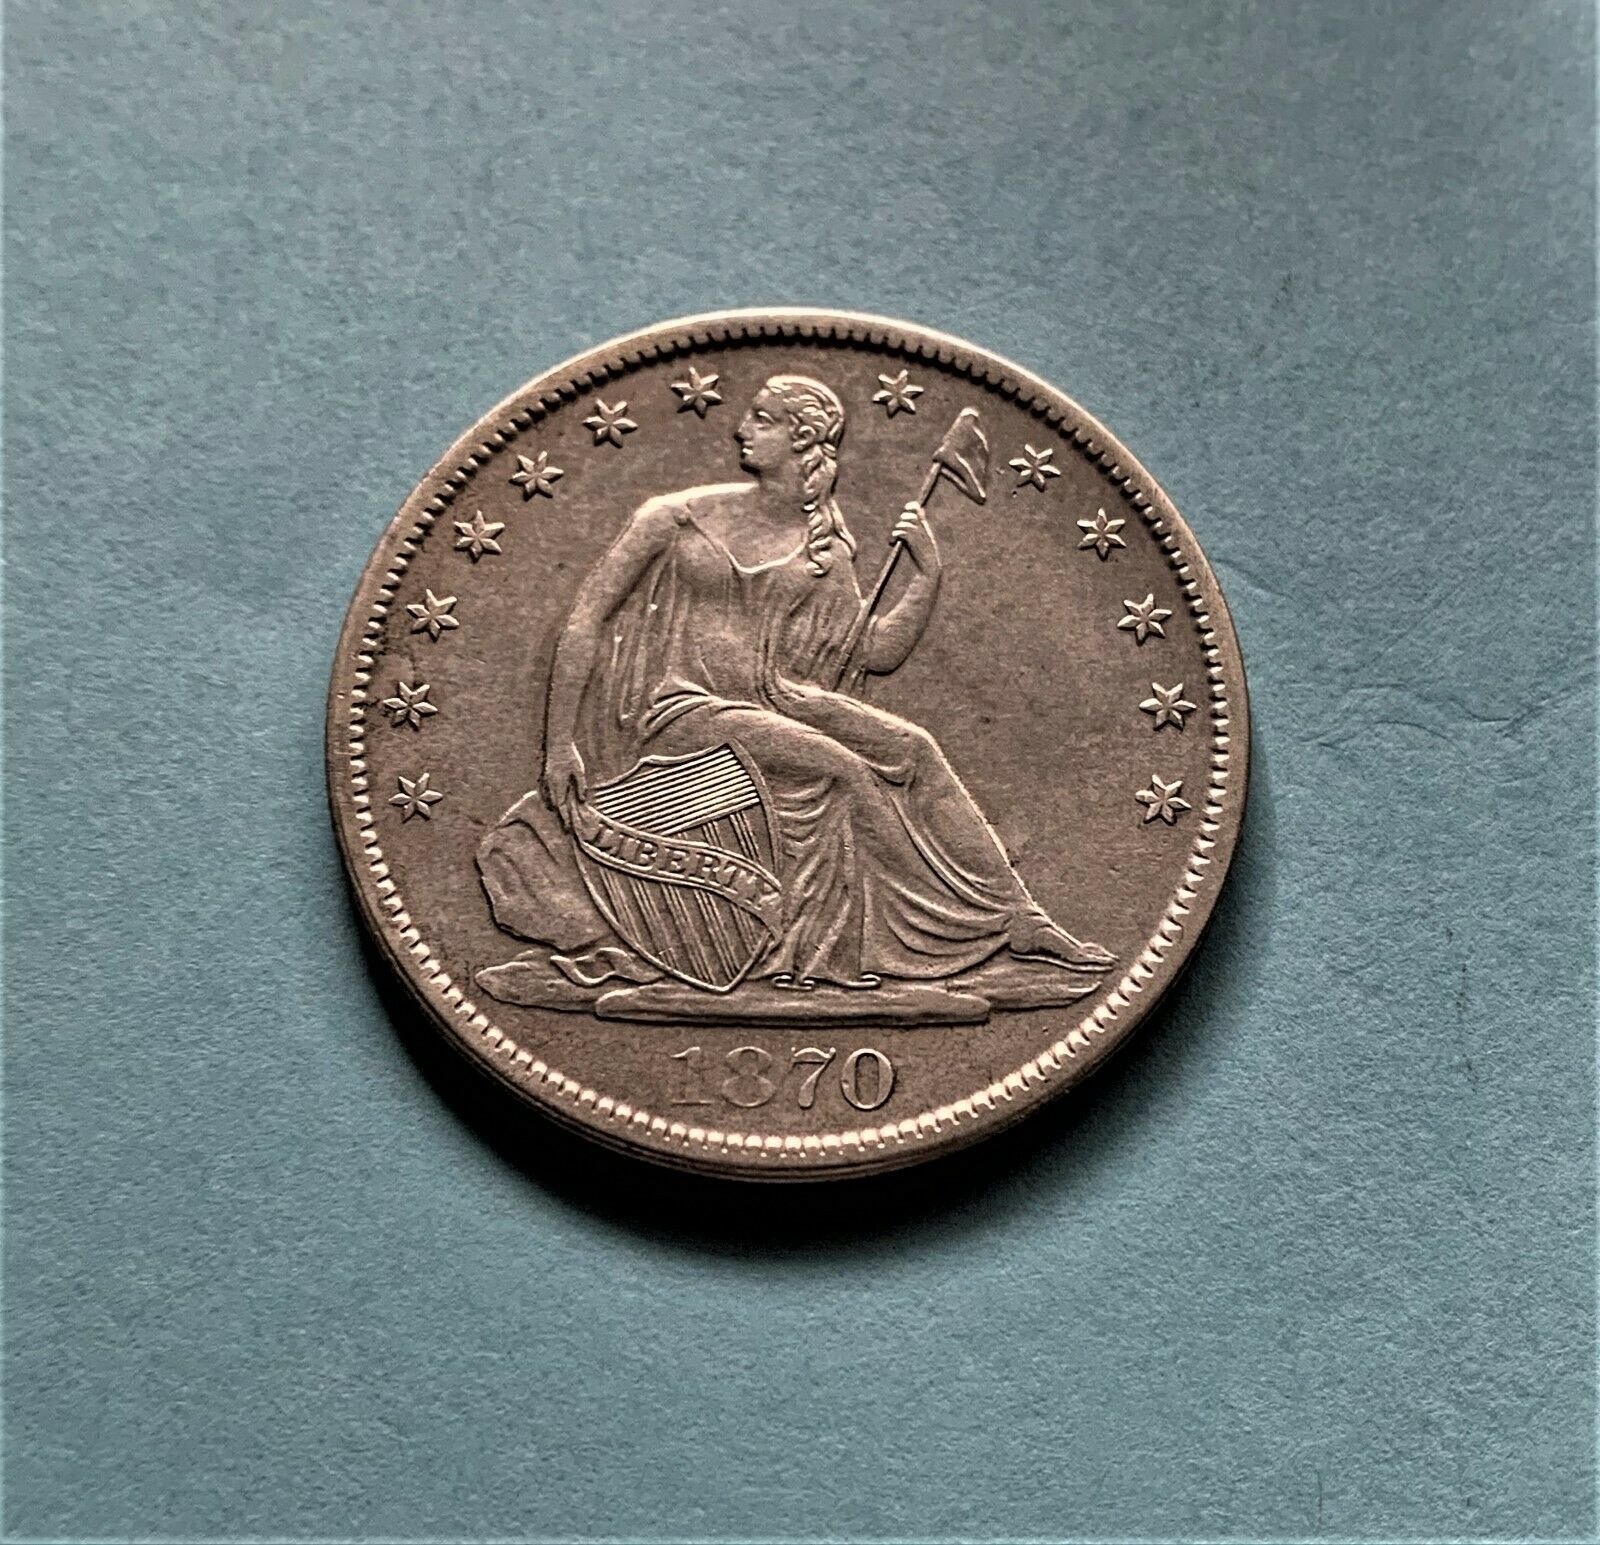 1870 S Liberty Seated Half Dollar Appealing Beautiful Bold Sharp Features